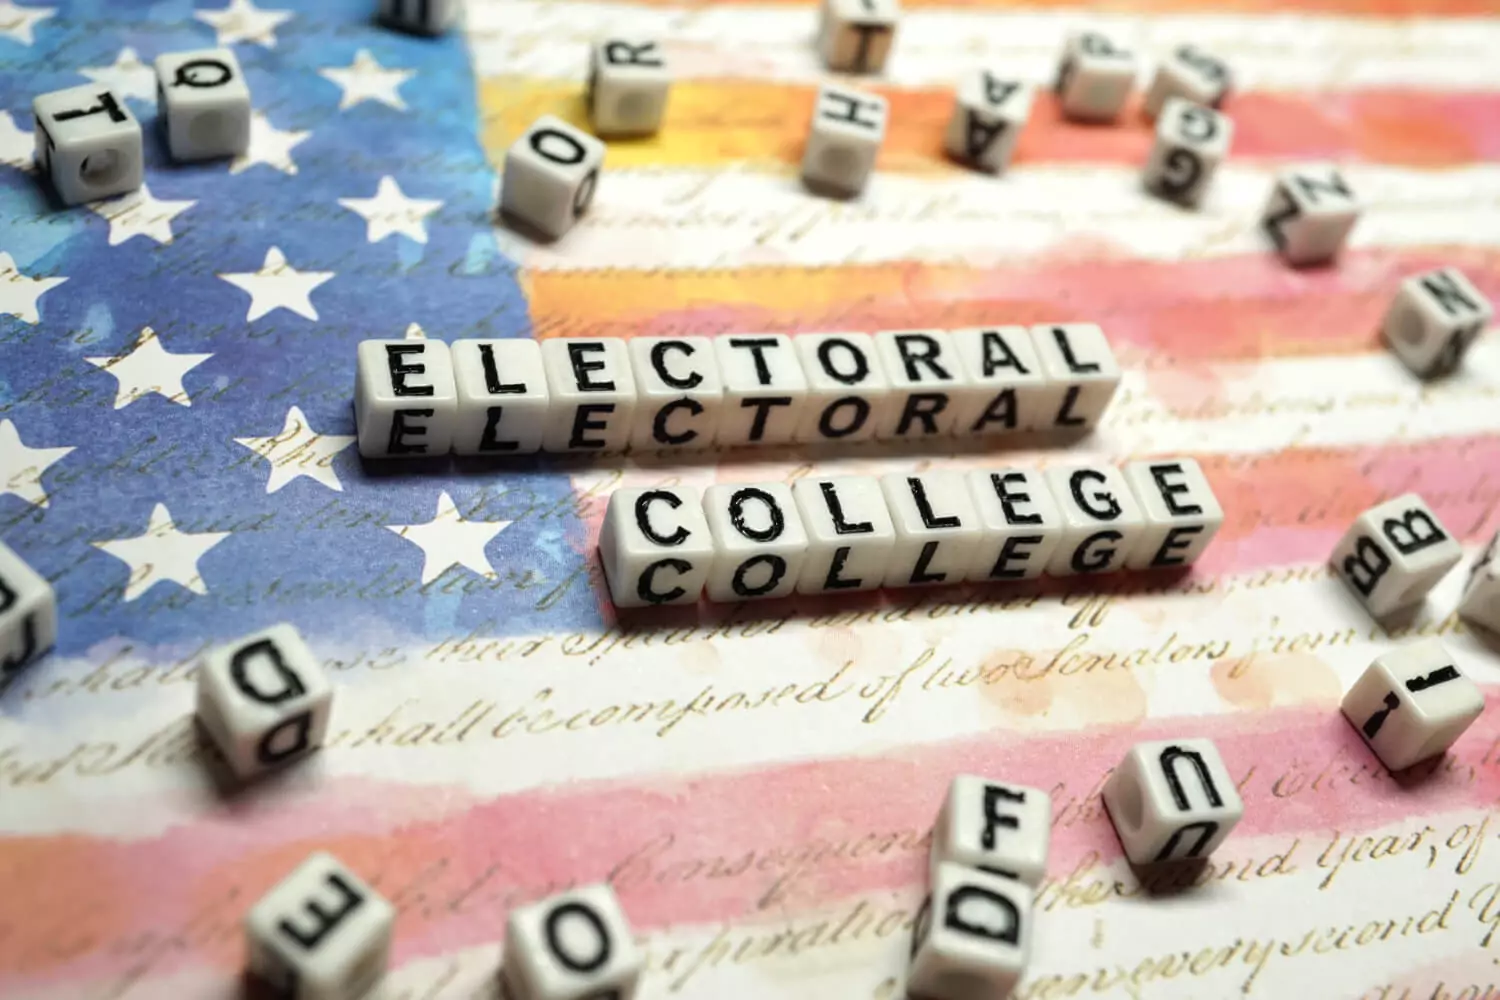 Why is the electoral college important?